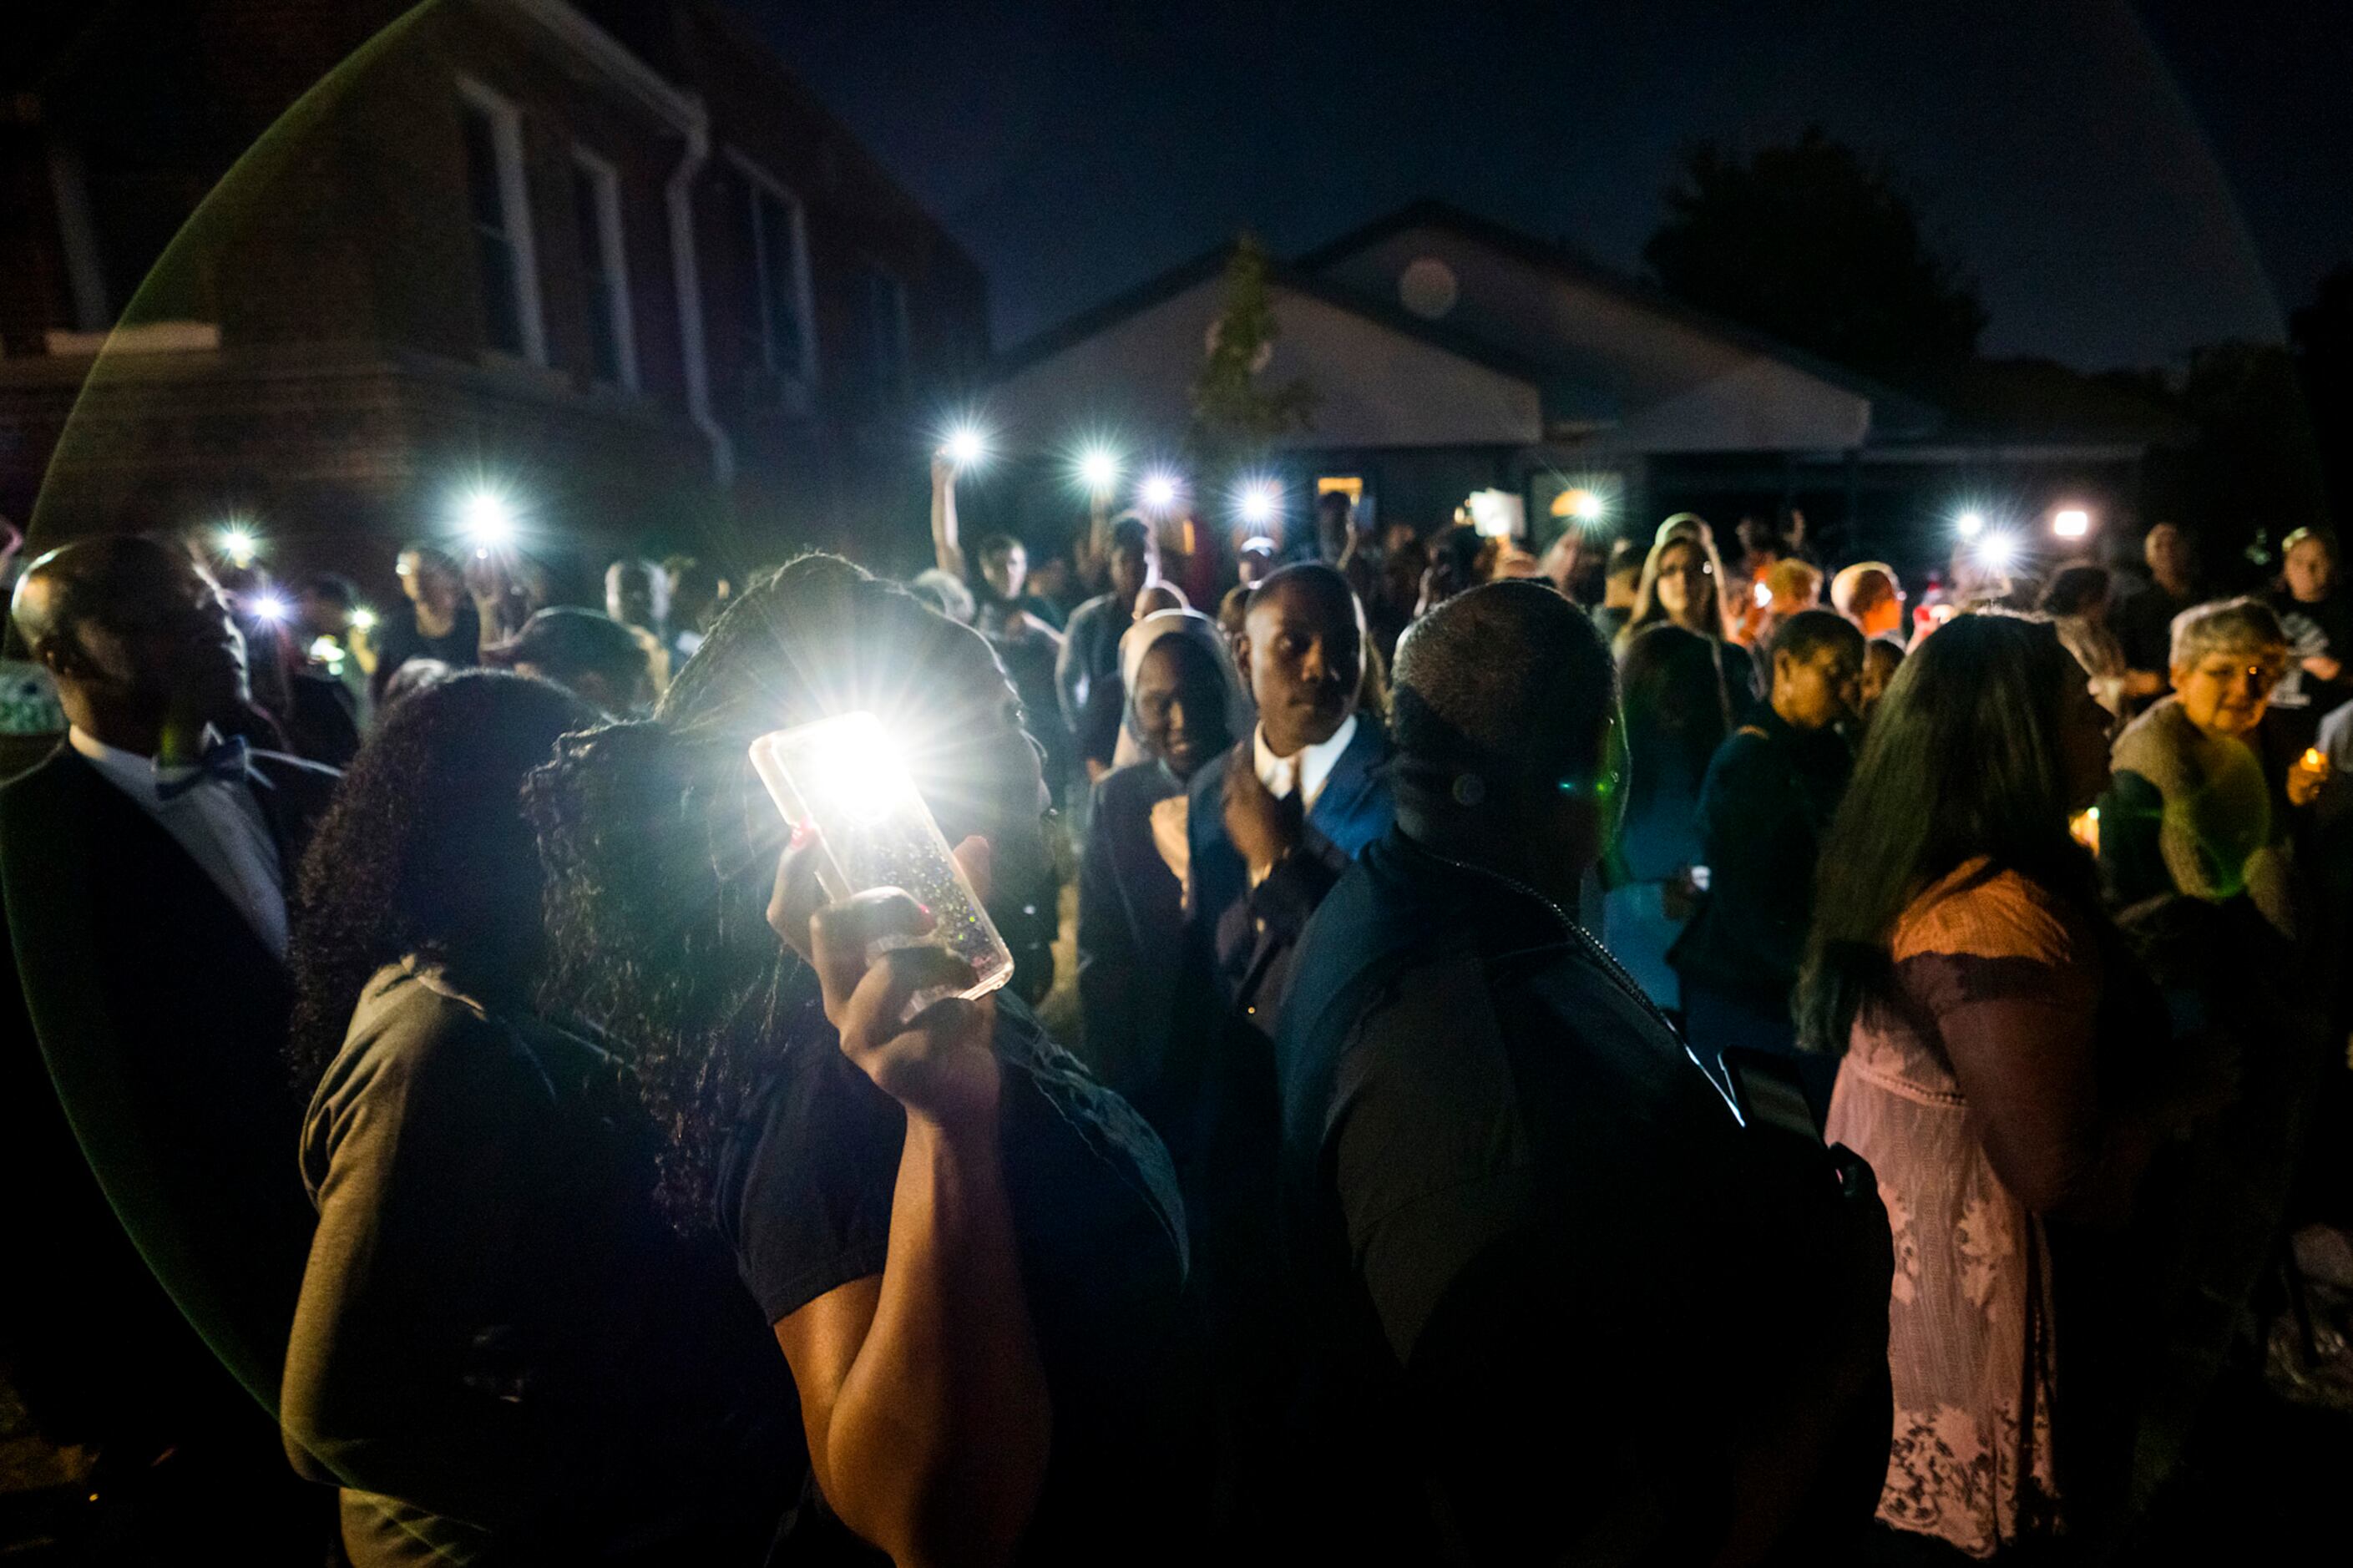 A large crowd gathers outside the house where Atatiana Jefferson was shot and killed, during...